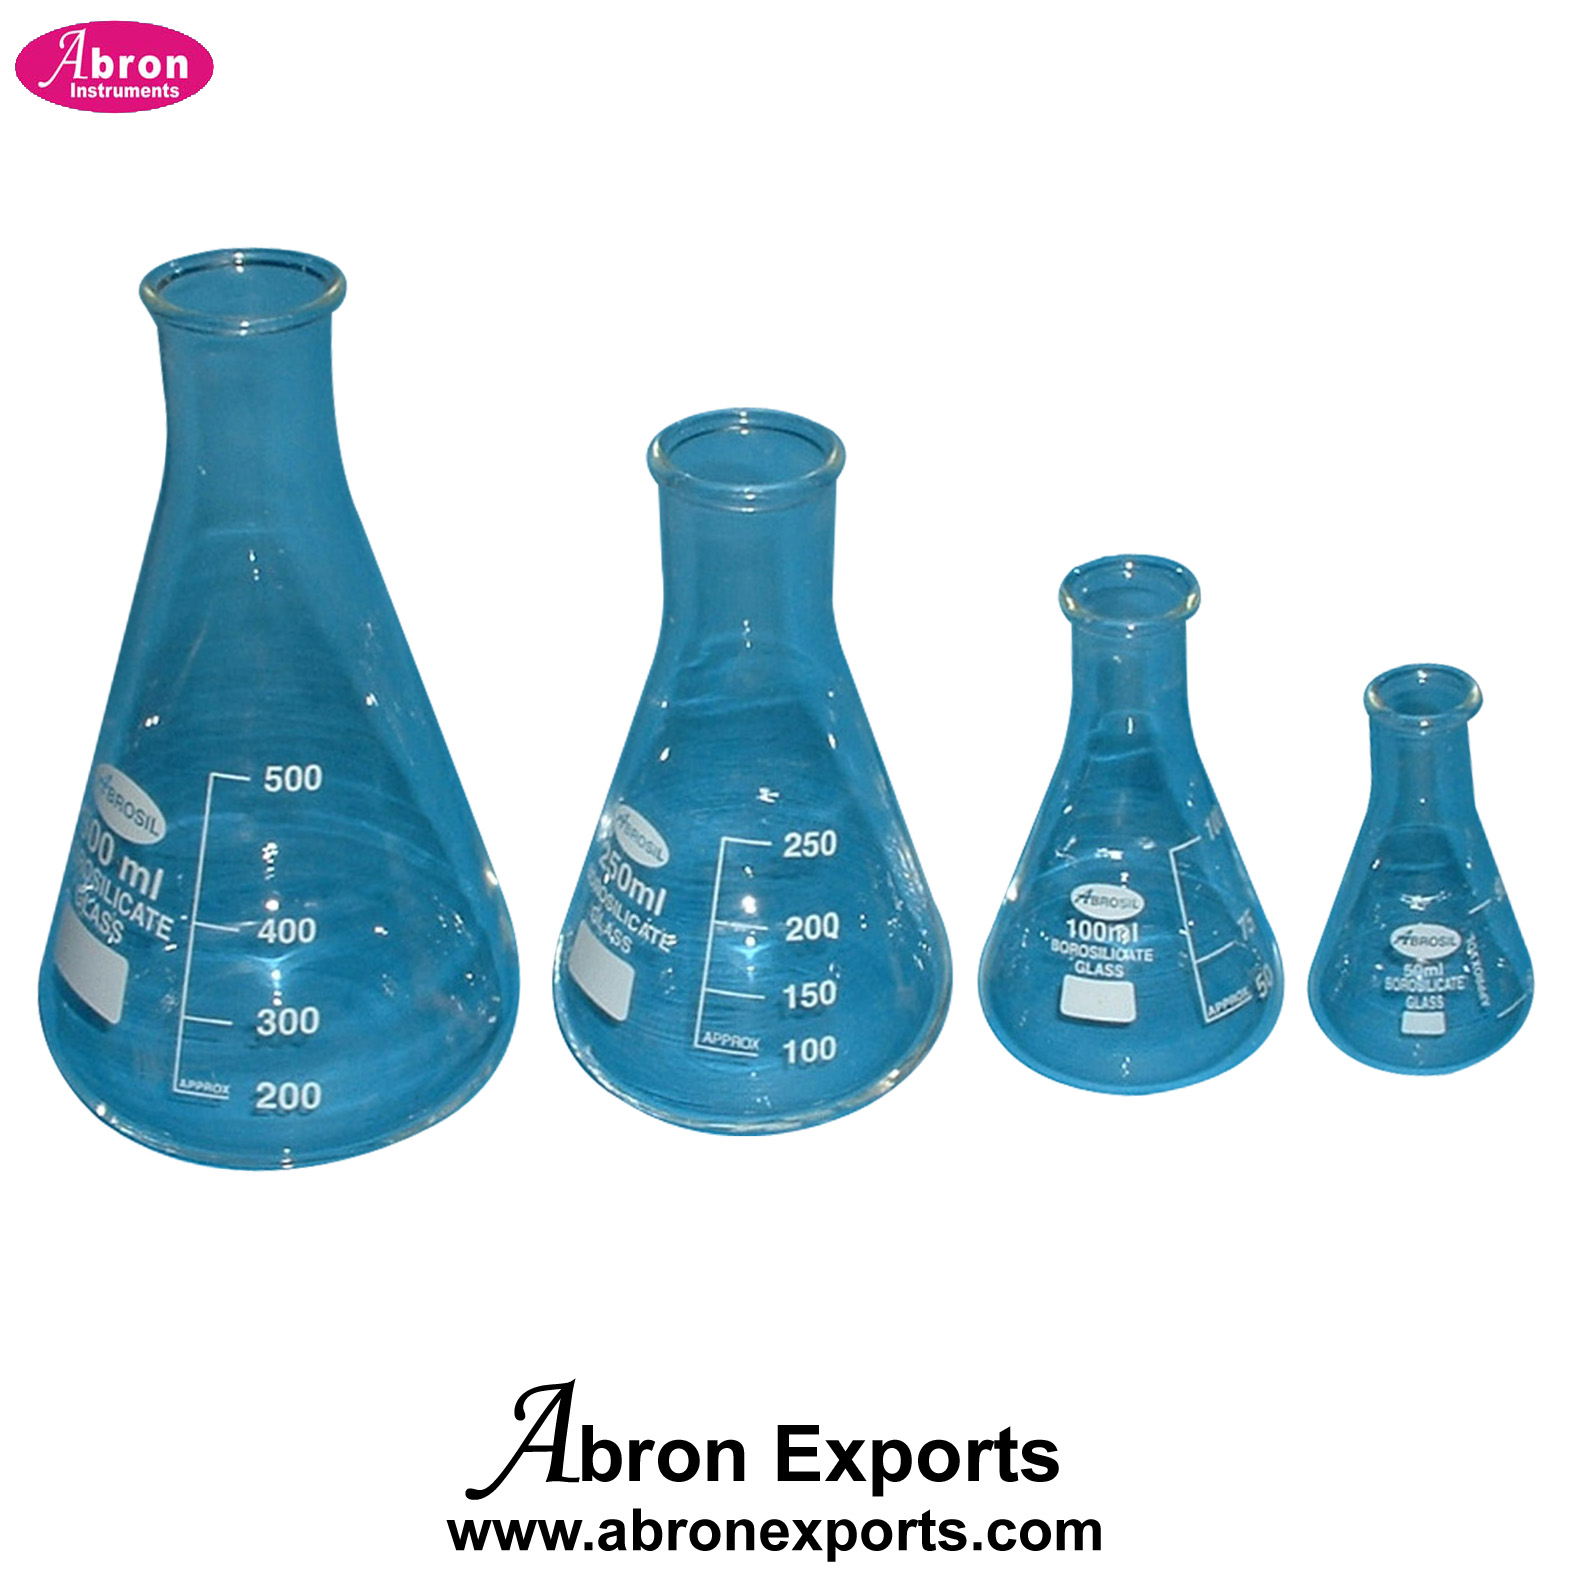 EC-049-33 Flasks Conical flask Erlenmeyer Flask Narrow Mouth 50ml cm3 Abron 